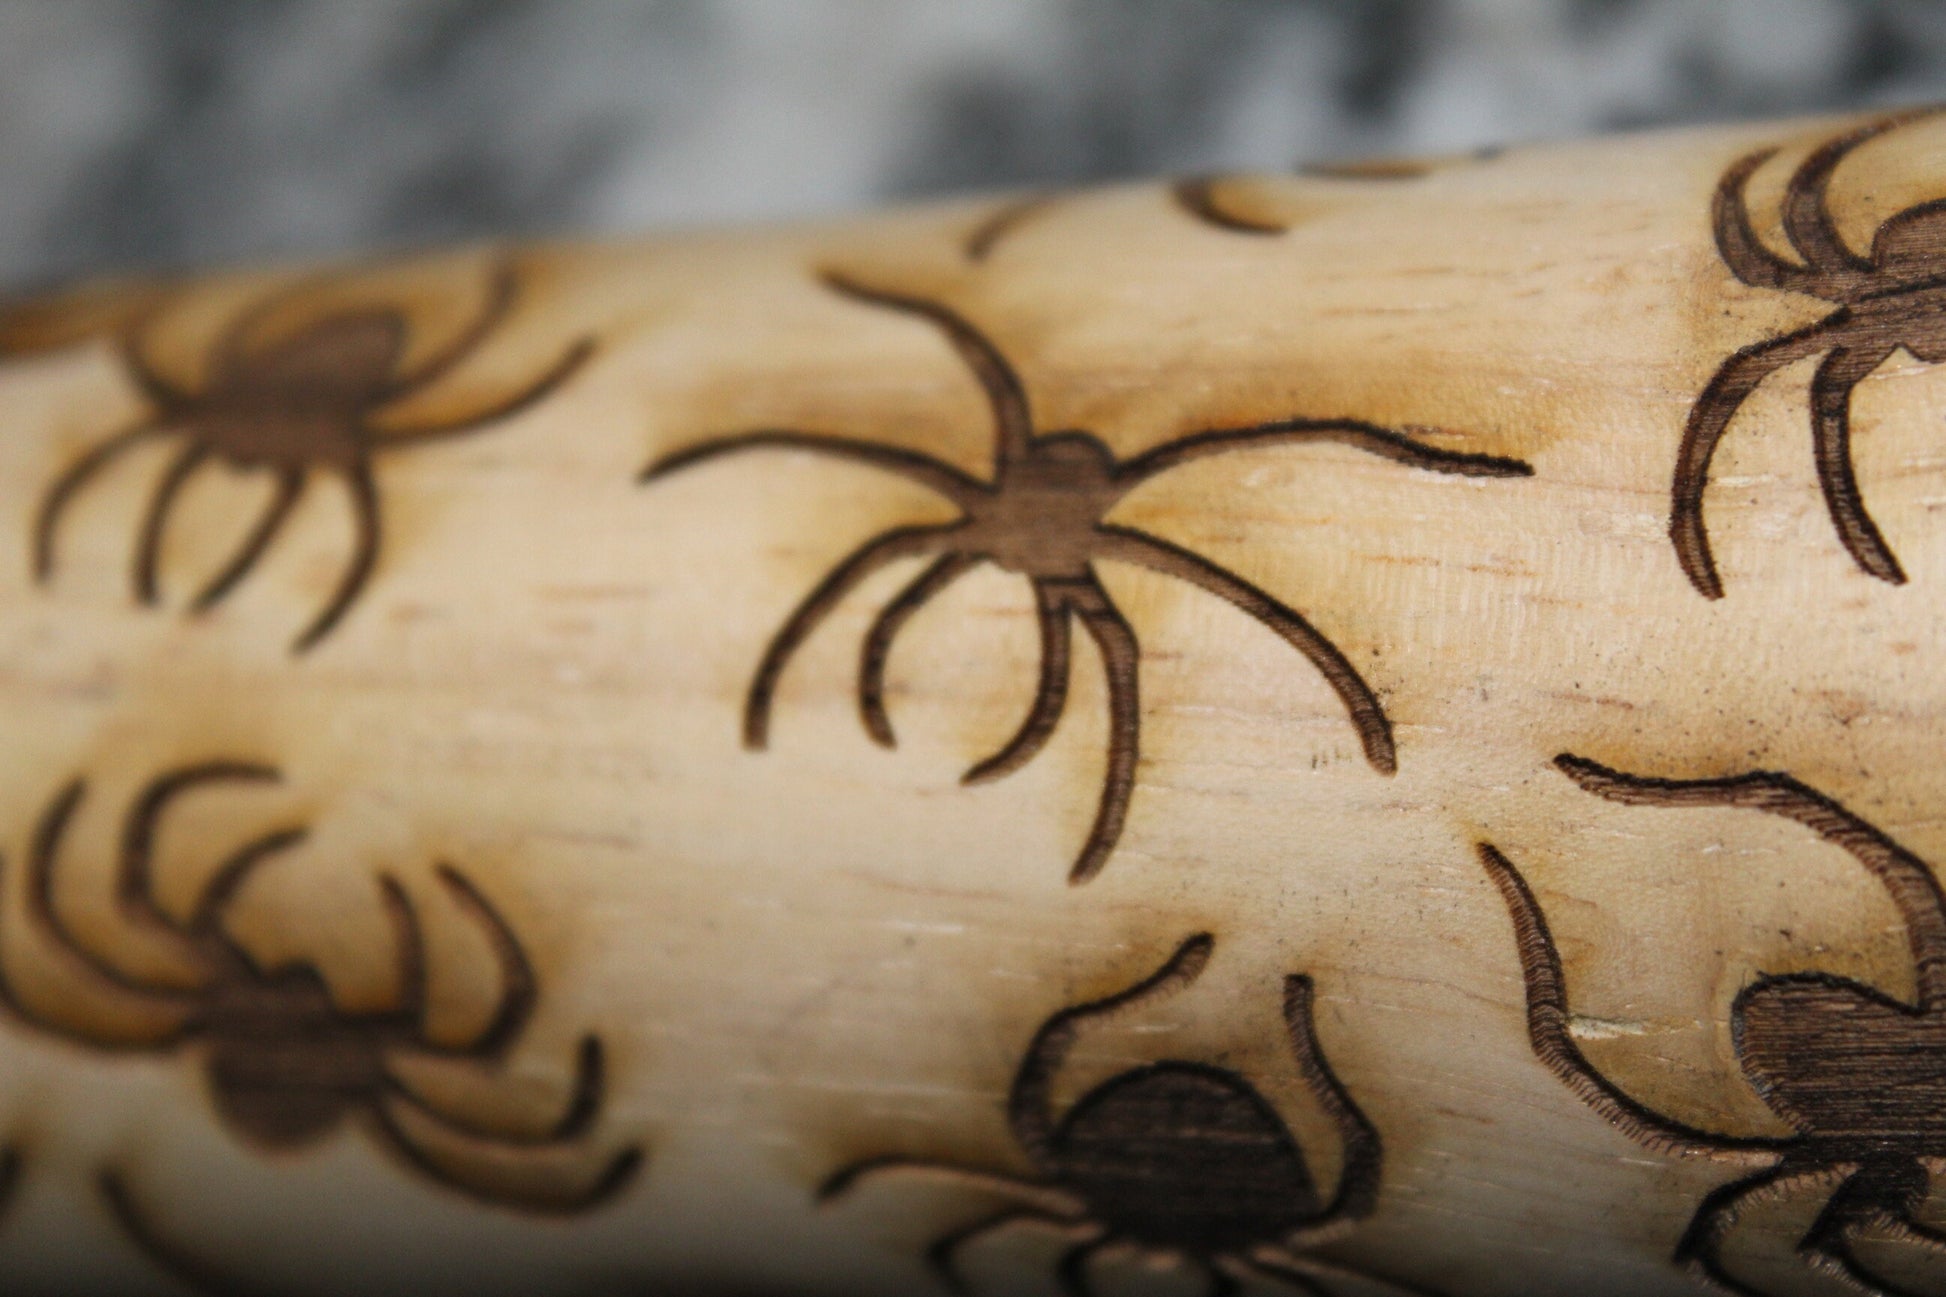 Spider Halloween Creepy Arachnid Bug Rolling Pin Texture Embossed Engraved Wooden Cookie Stamp Laser Pottery Clay Stamp Embossing Roller Art